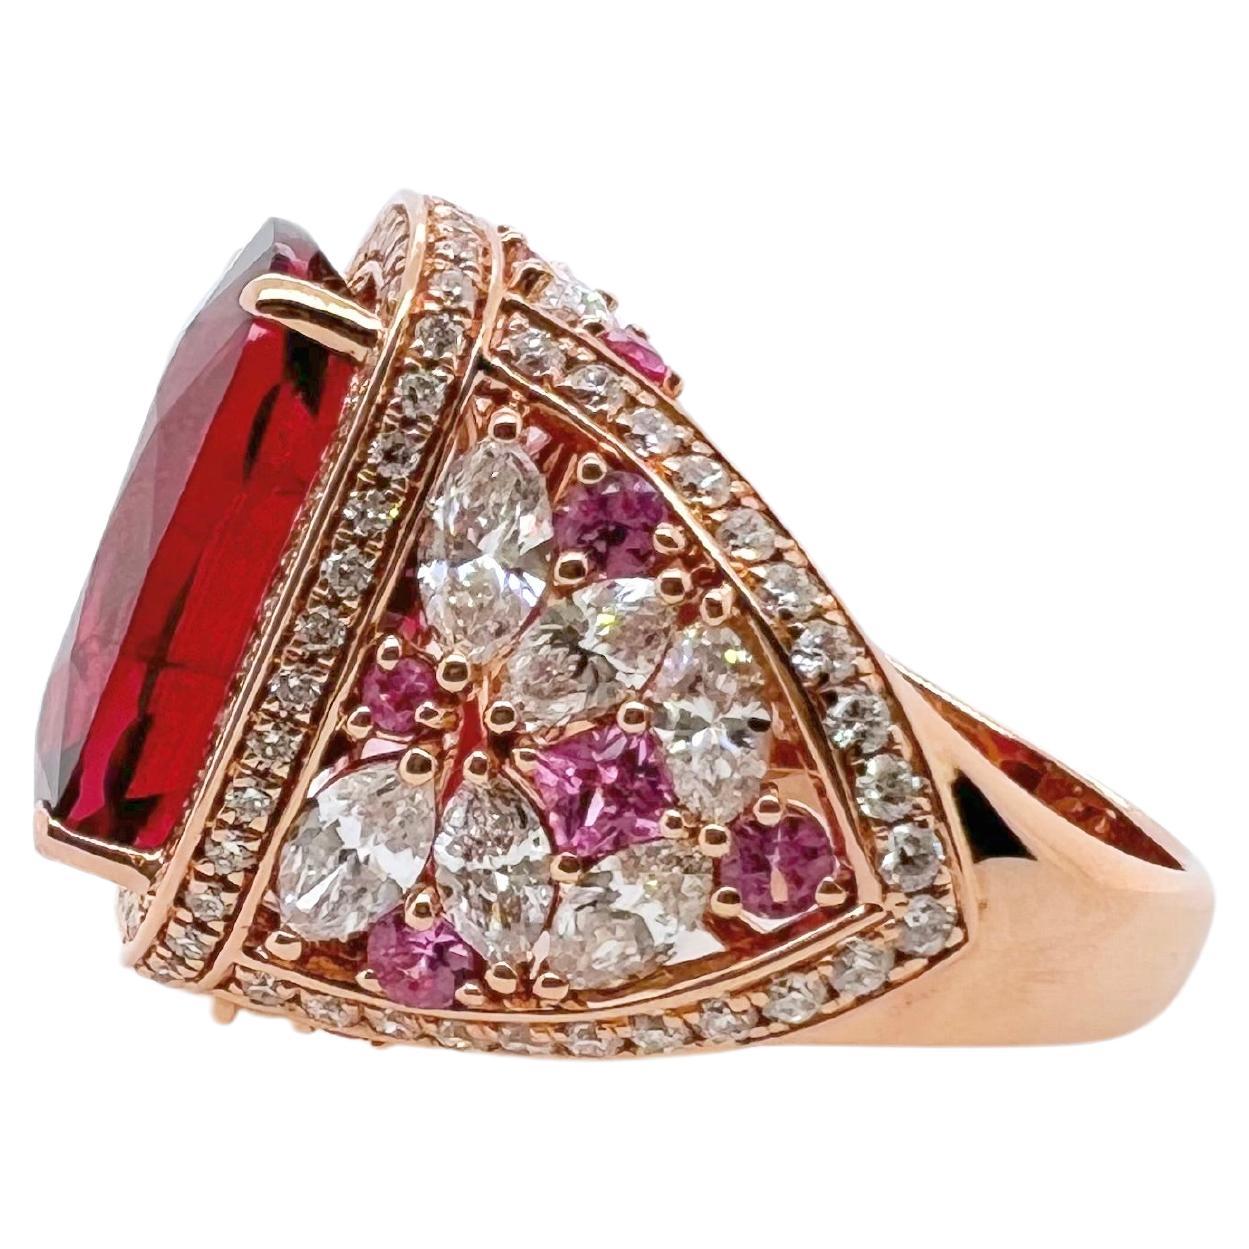 This beautiful ring has so many intricate details that will make you in awe! The rubellite is gem quality with absolutely amazing color and brilliance. The raspberry red is bold and vibrant that captivates the eyes. The setting has beautiful marquis